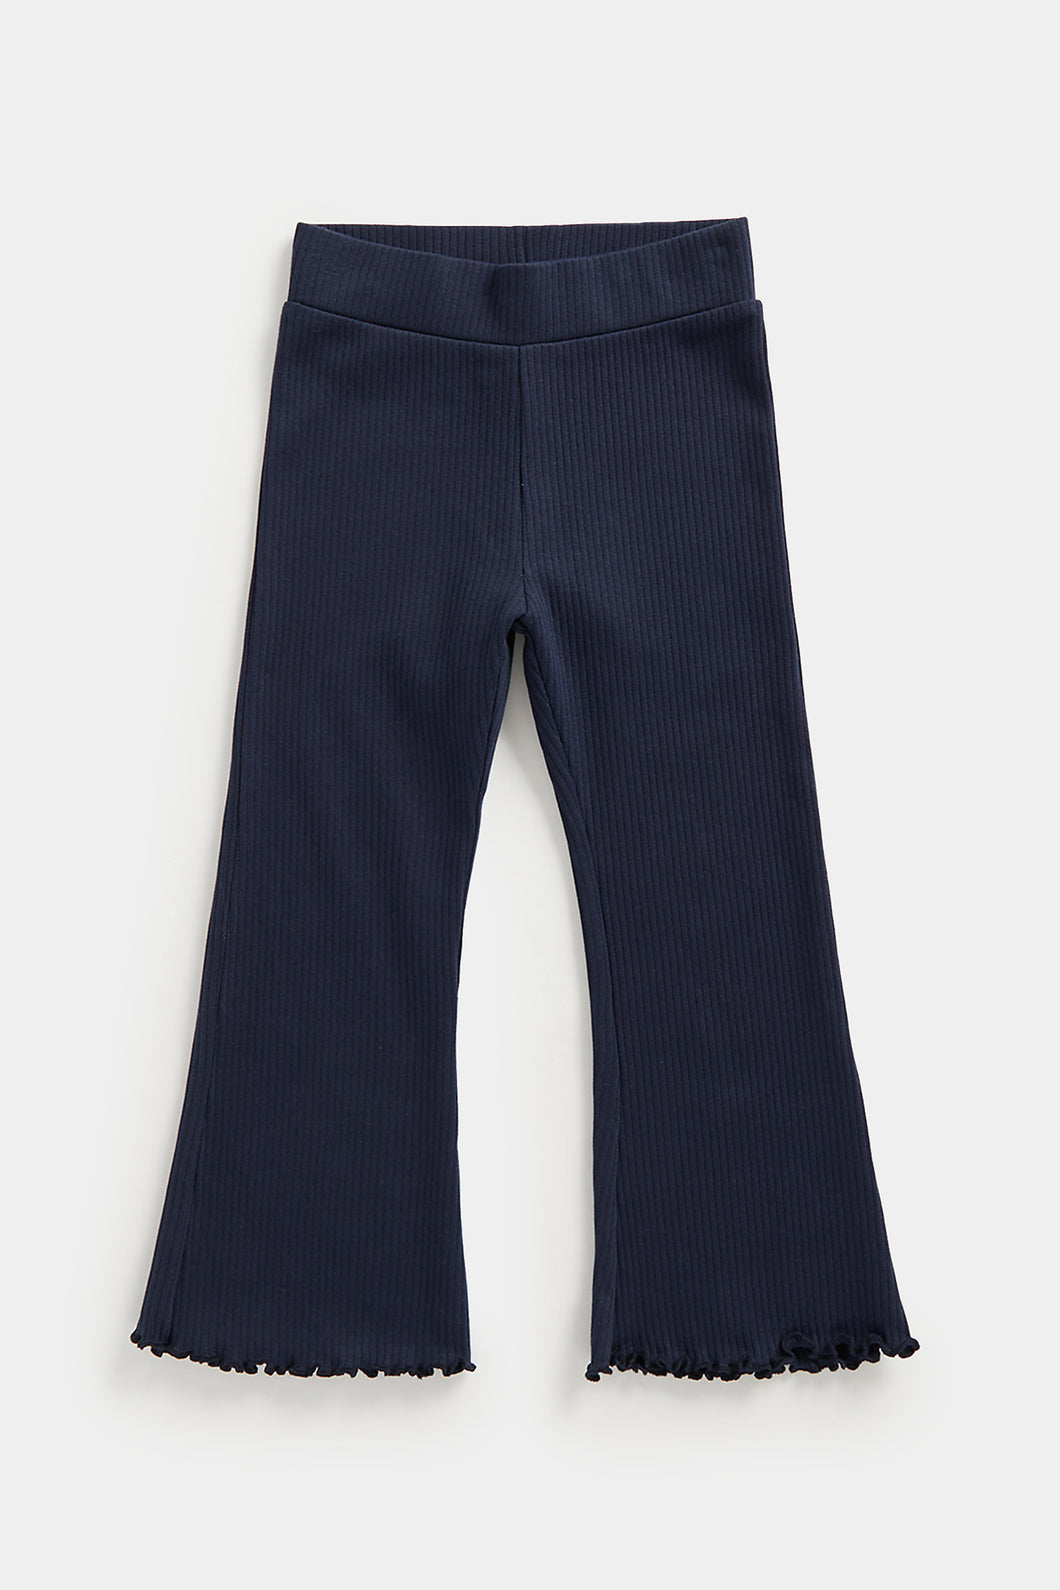 Mothercare Navy Flared Ribbed Leggings